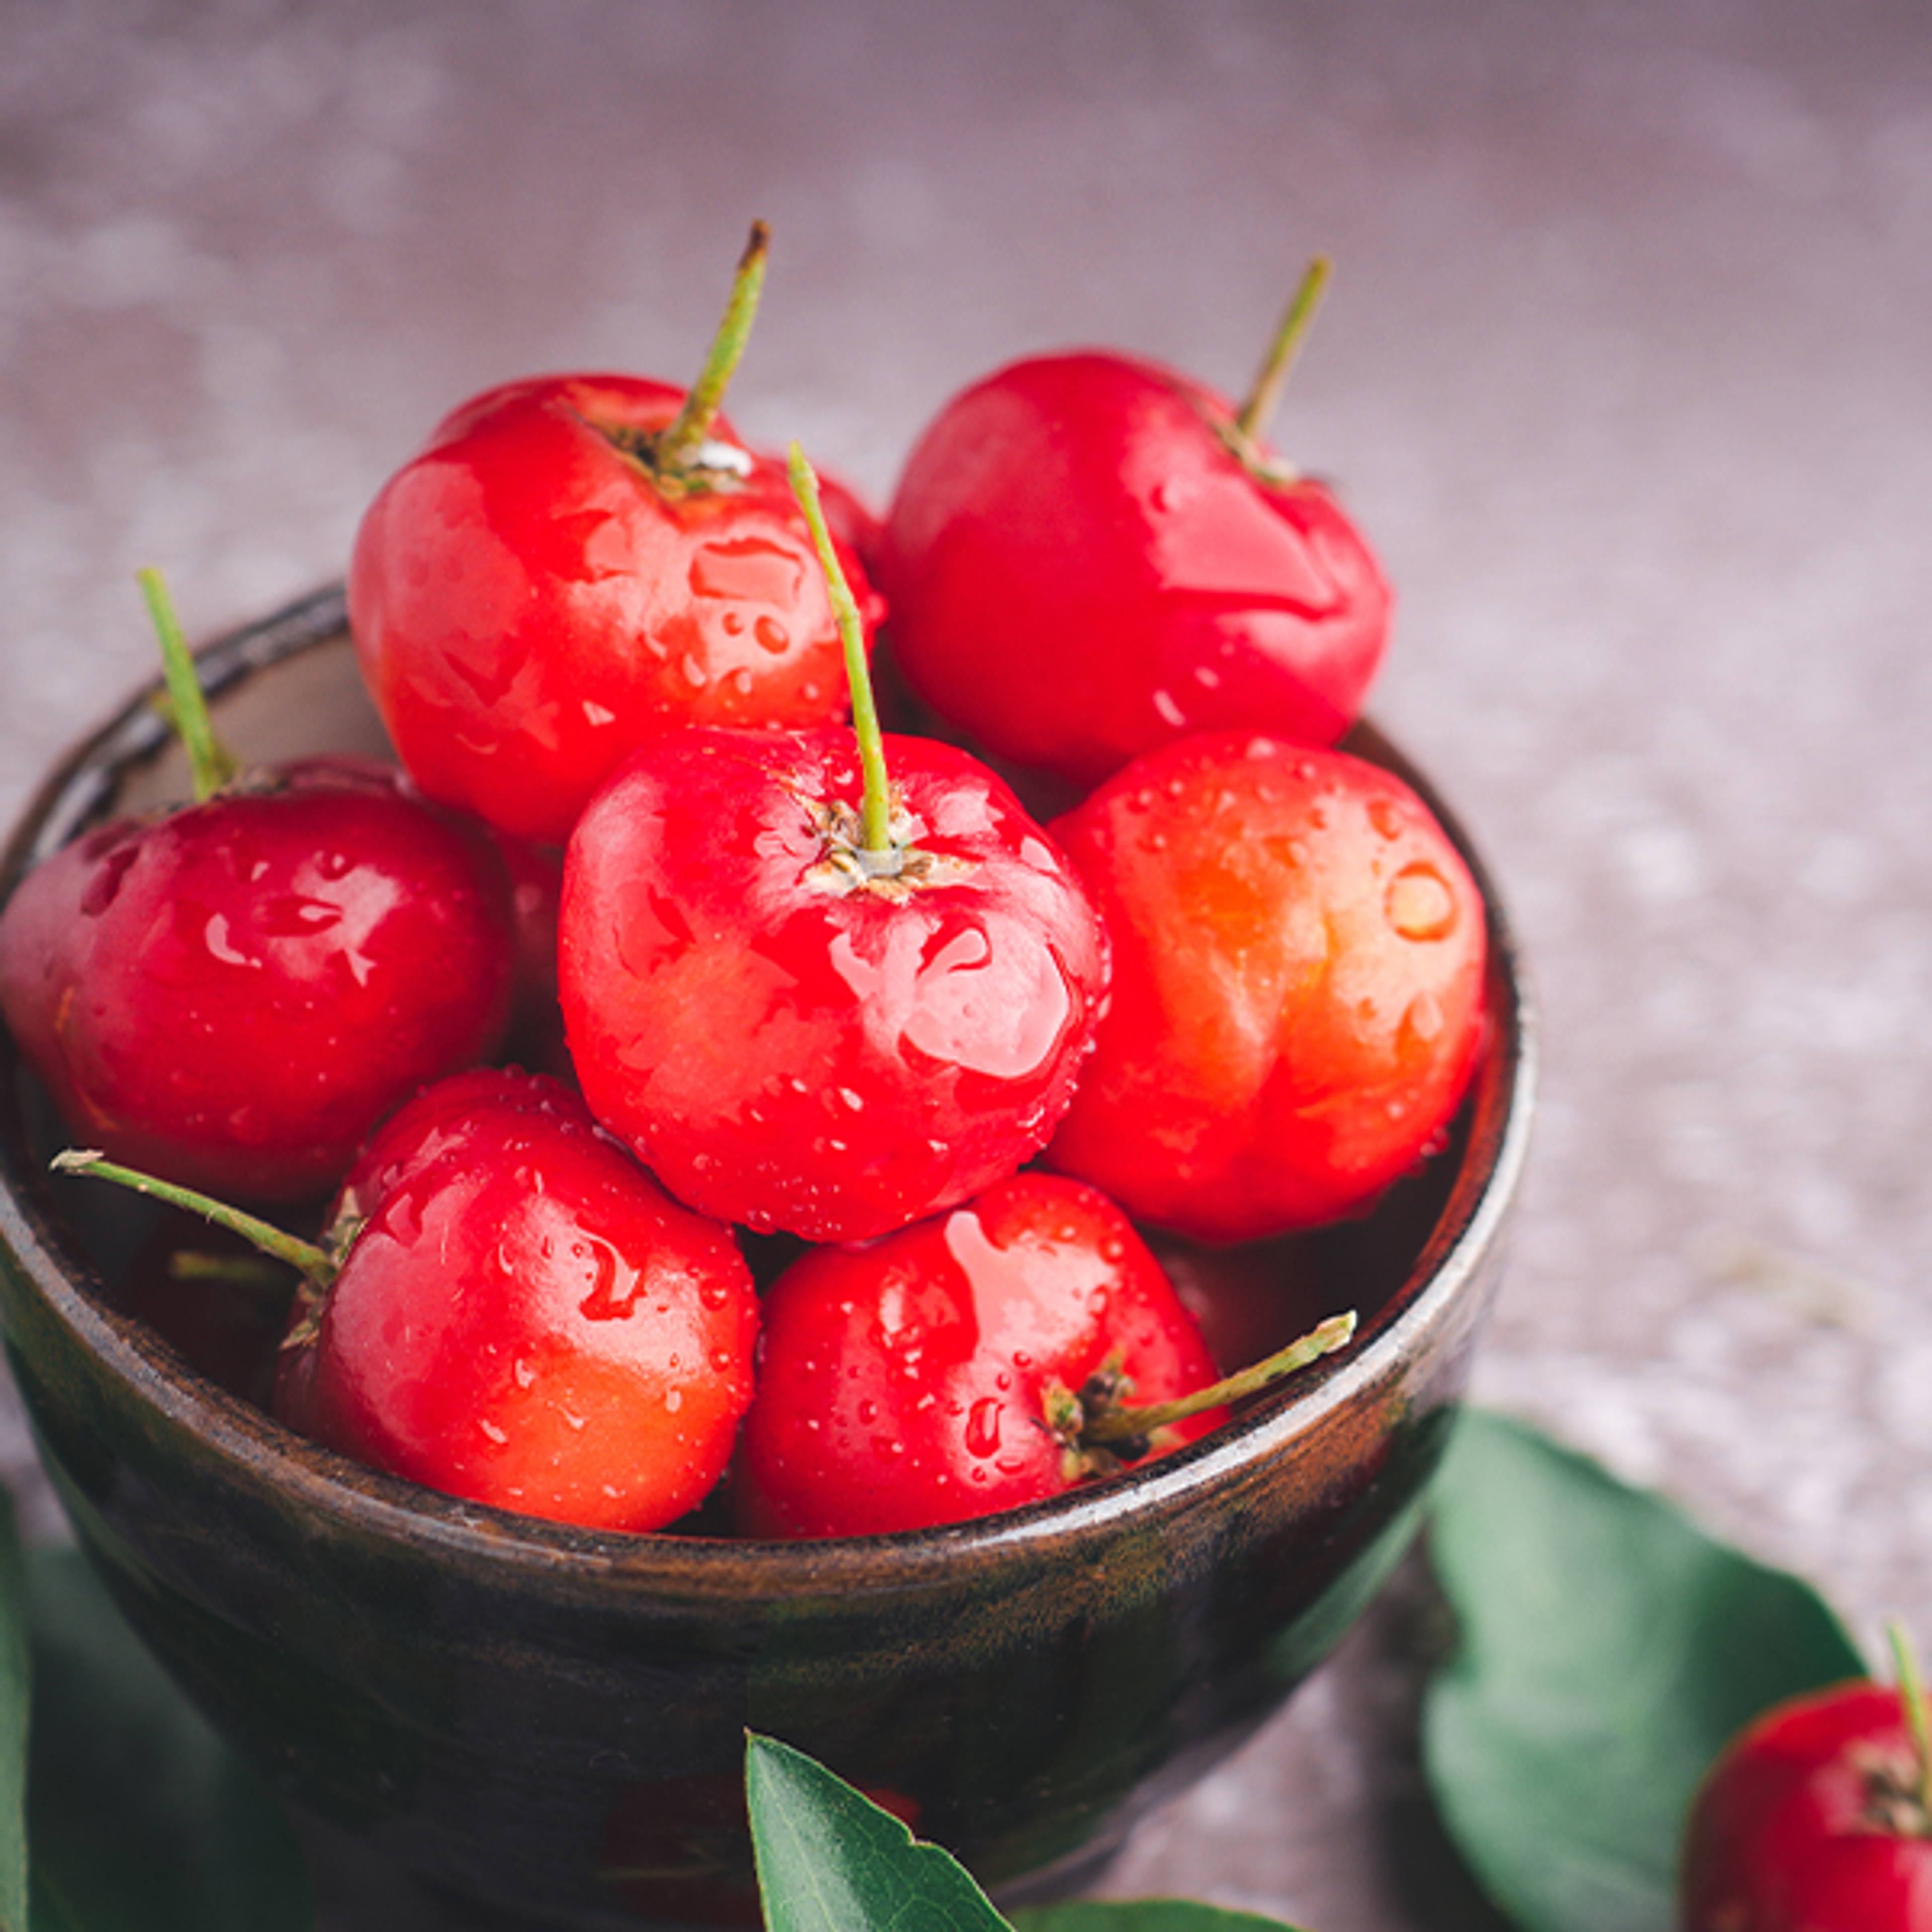 Acerola - A natural vitamin C for your health